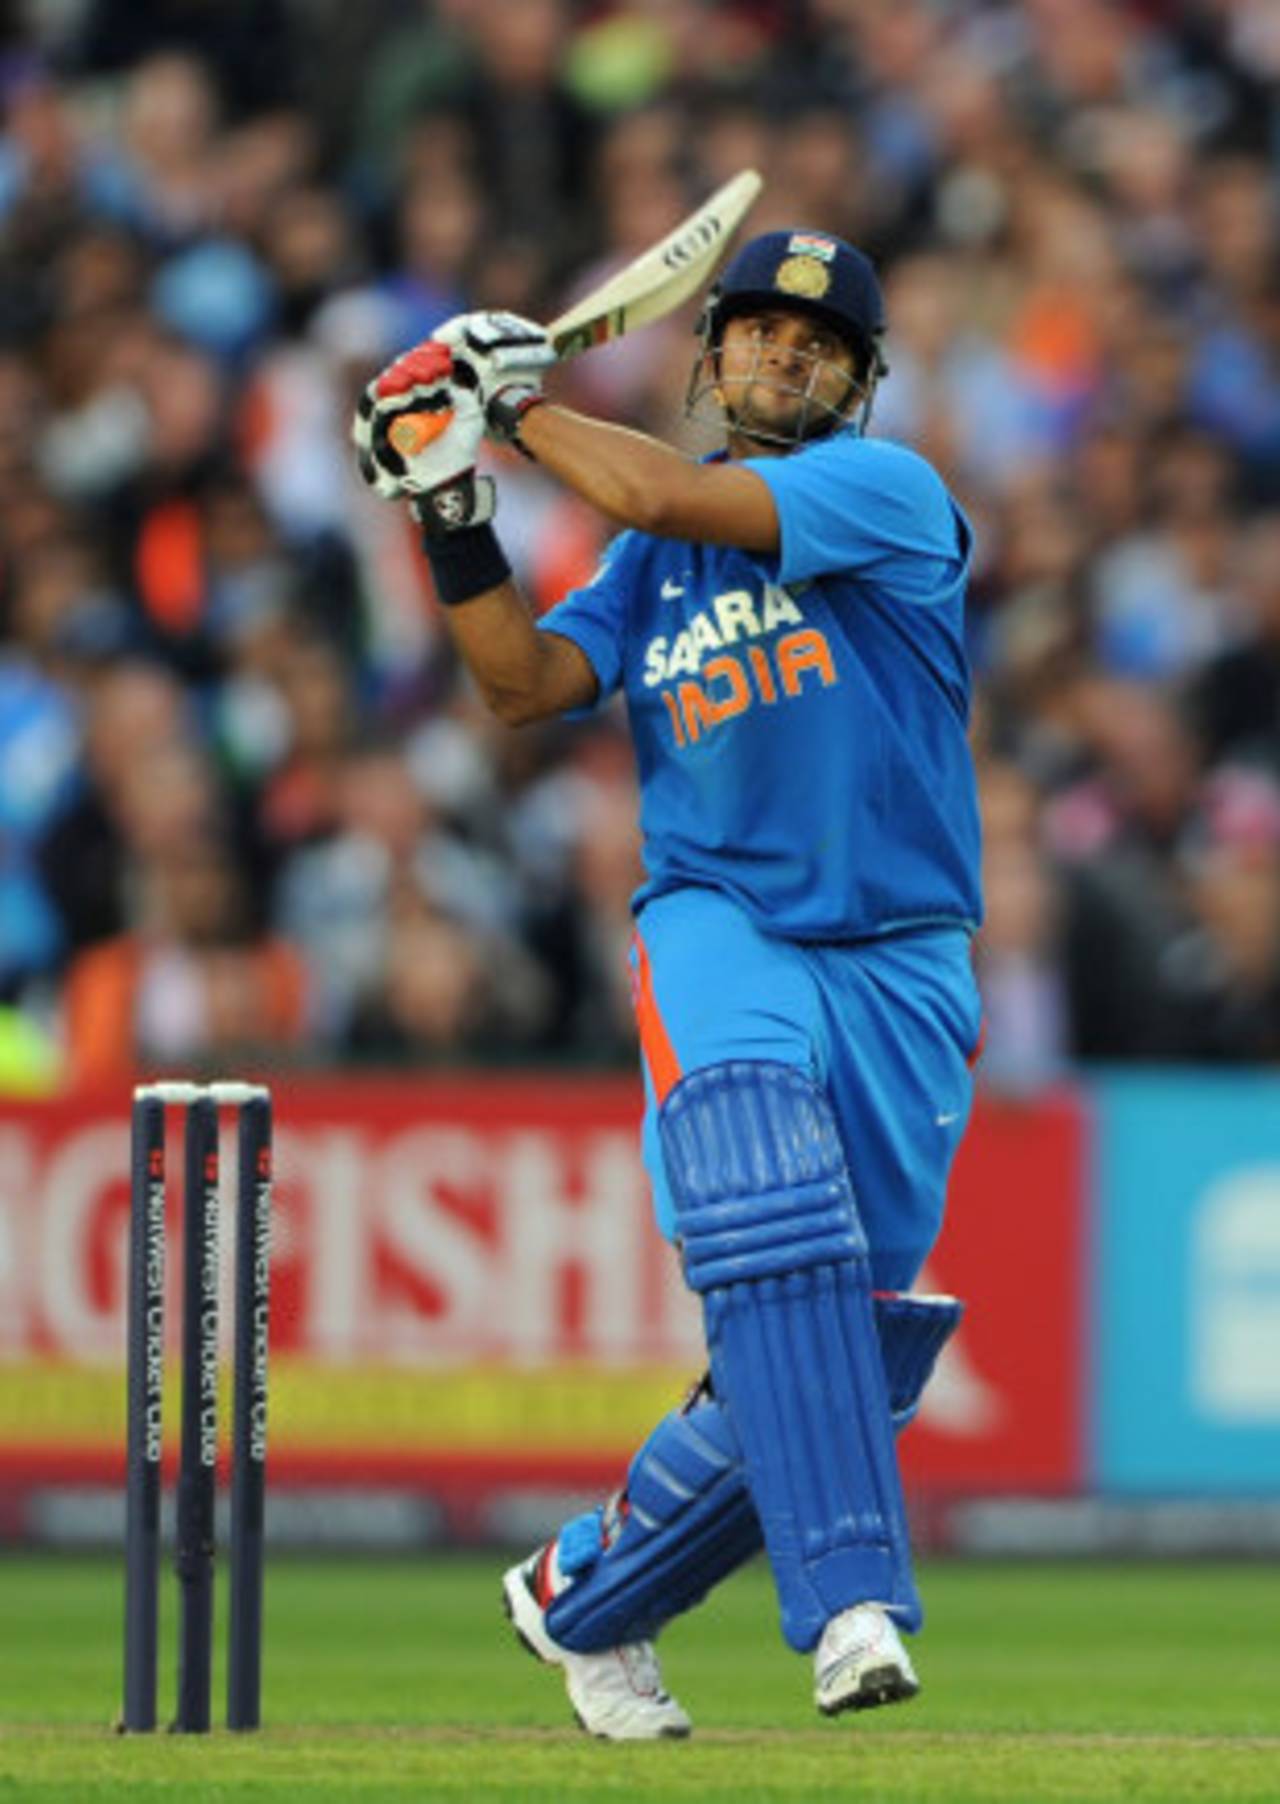 Suresh Raina made 33 from 19 balls to add some late impetus, England v India, Twenty20, Old Trafford, August 31, 2011